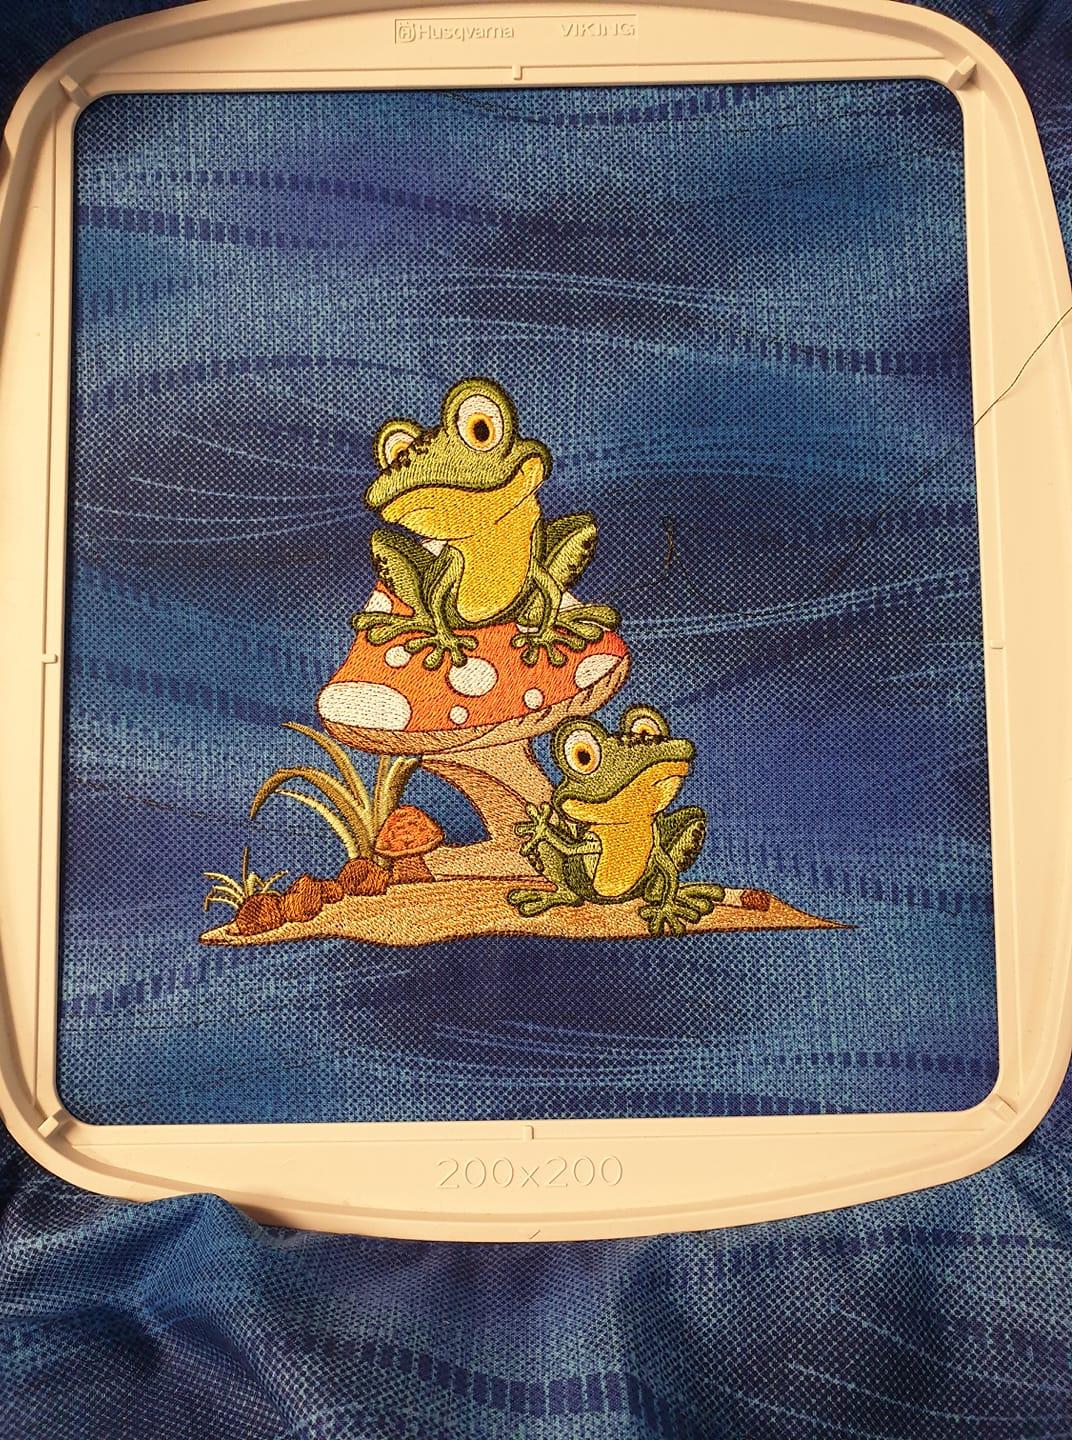 Two frogs embroidery design on hoop